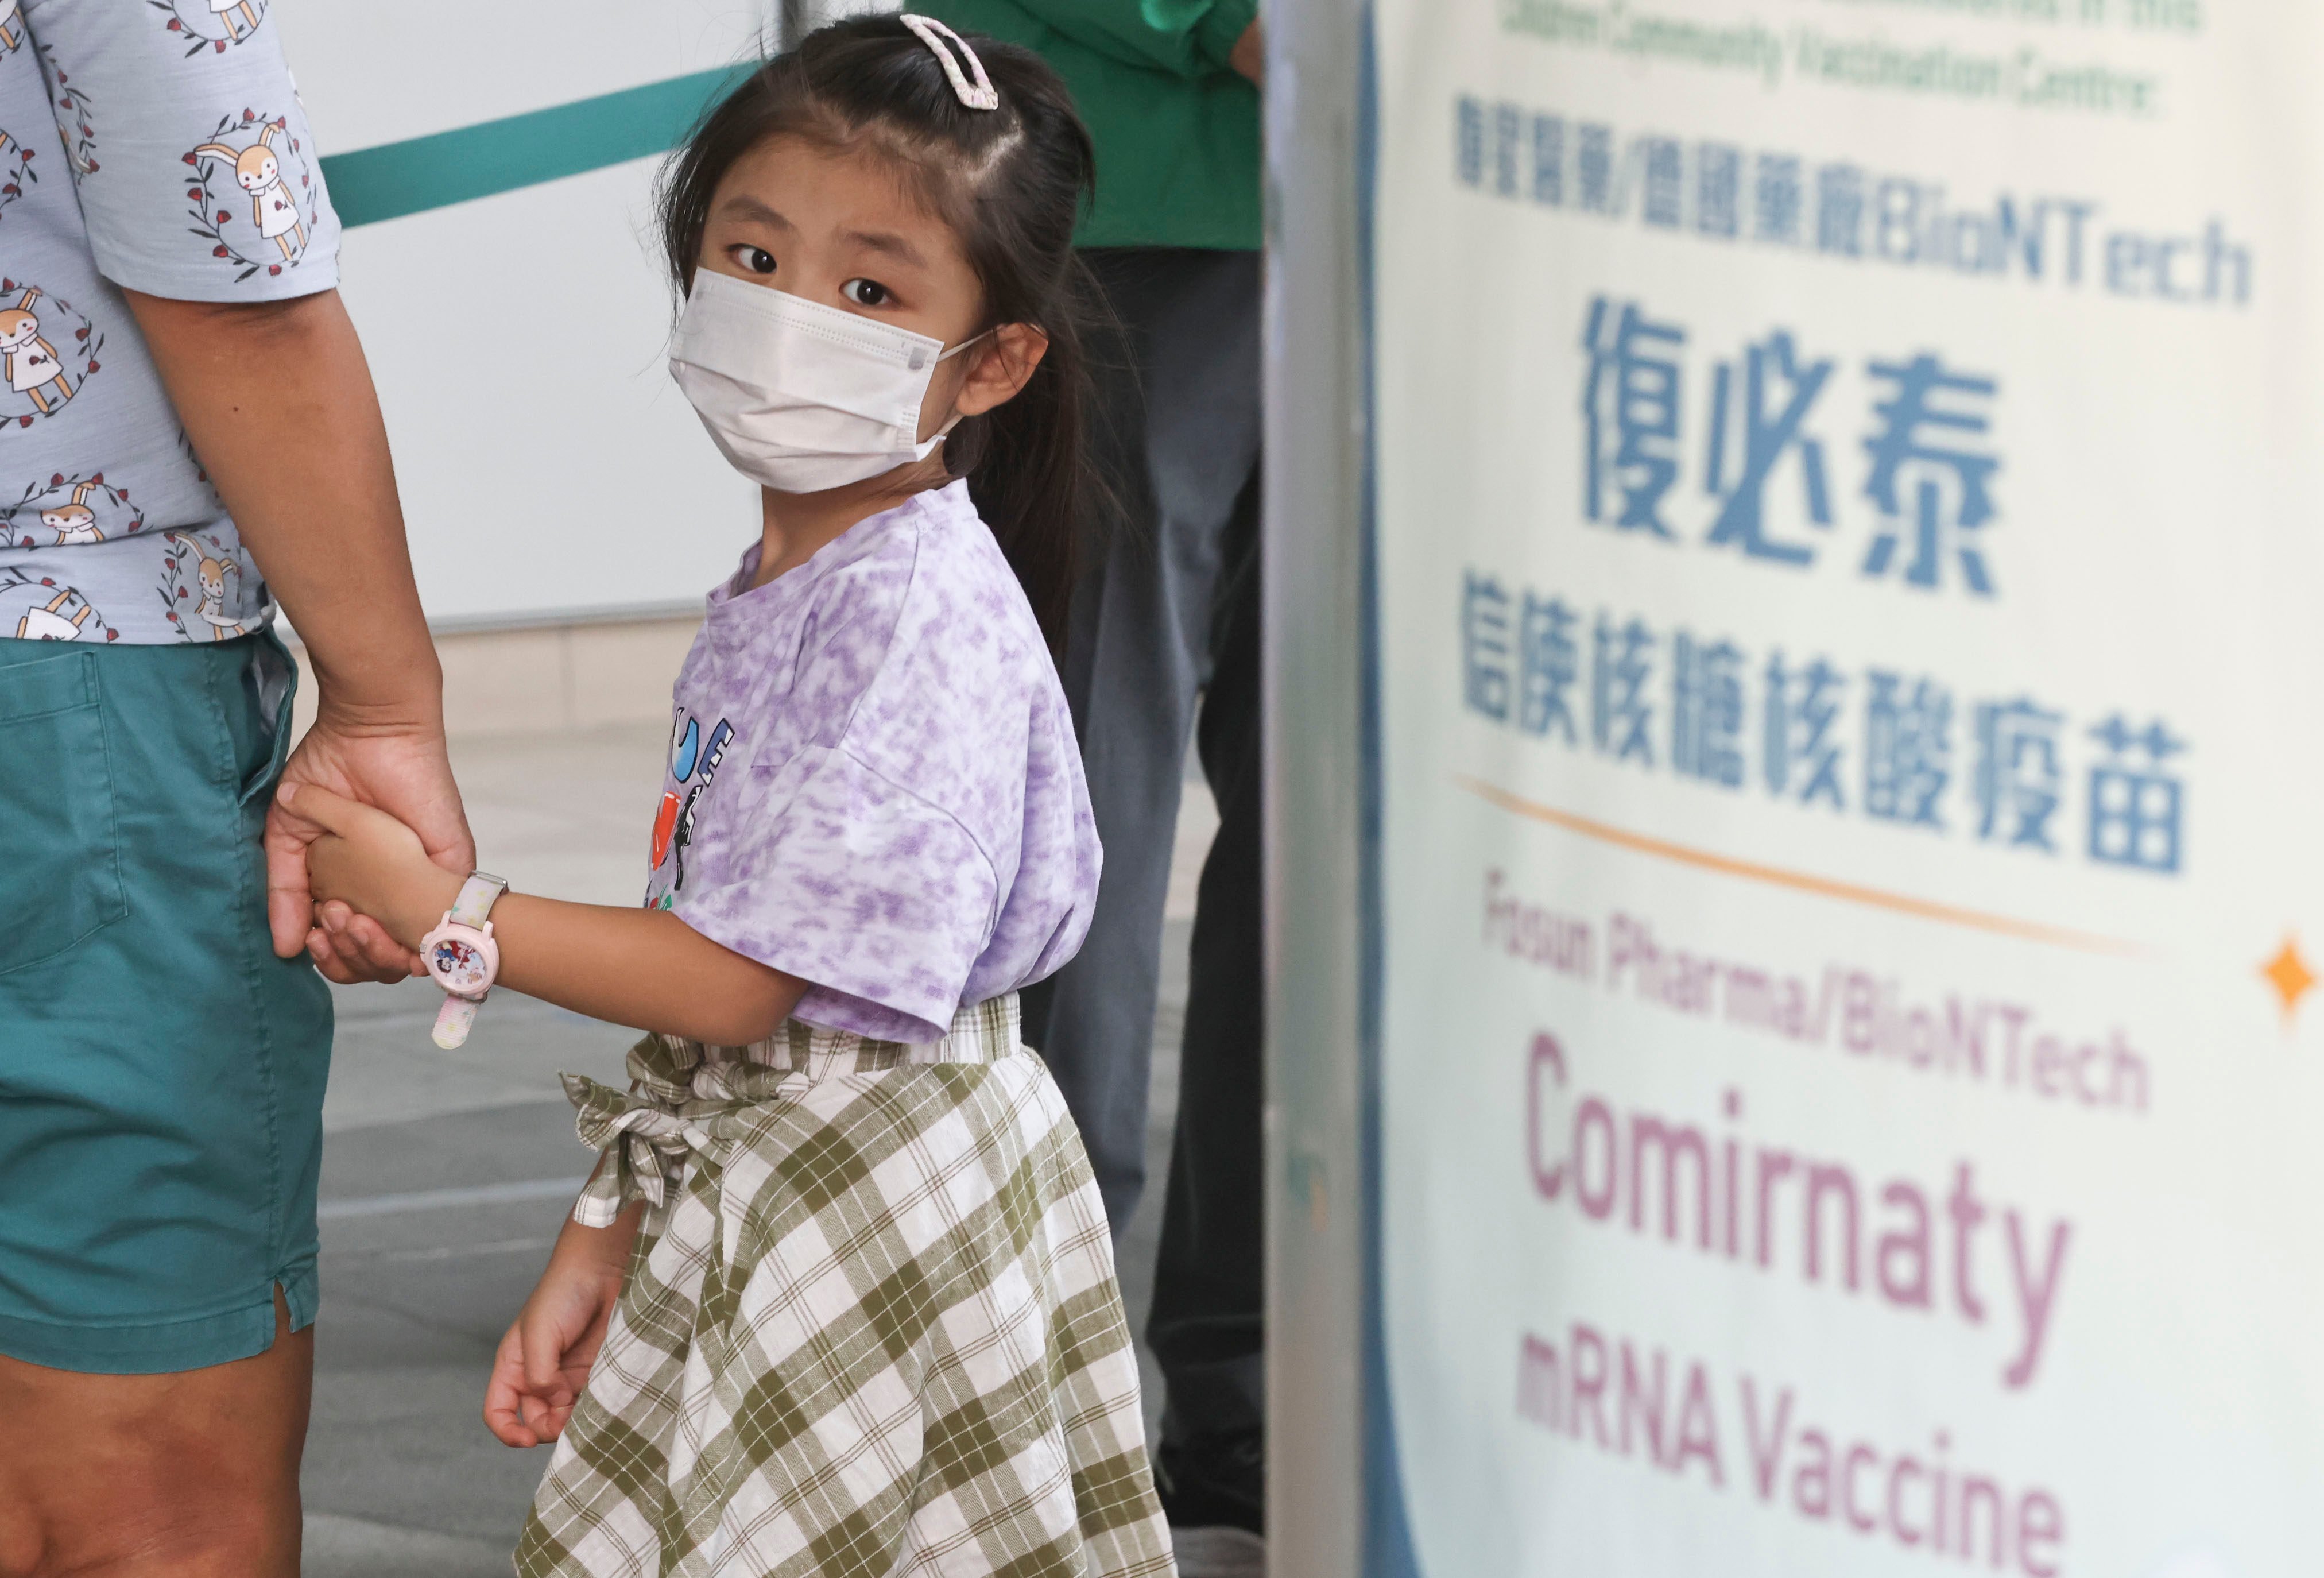 Officials have urged parents to ensure their children are vaccinated against Covid-19. Photo: K. Y. Cheng